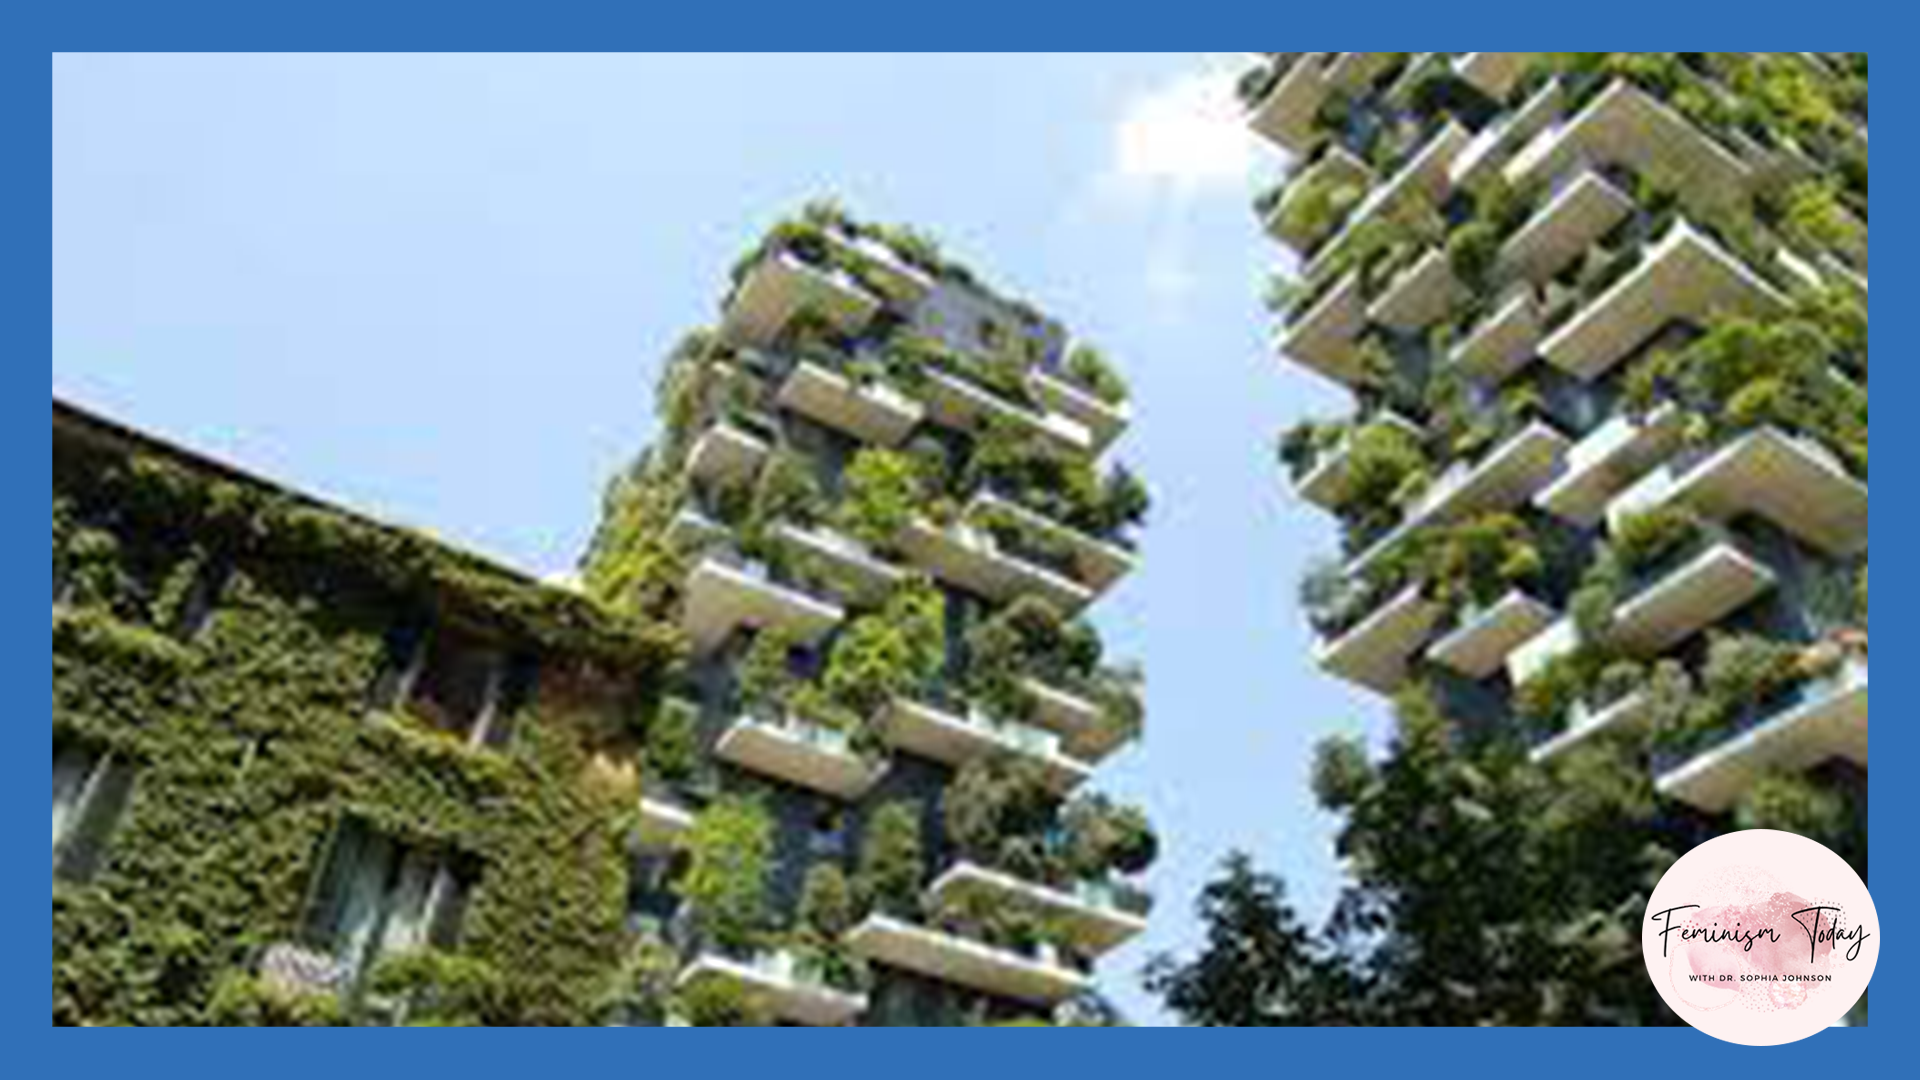 Solution to Air Pollution : BioPHilia